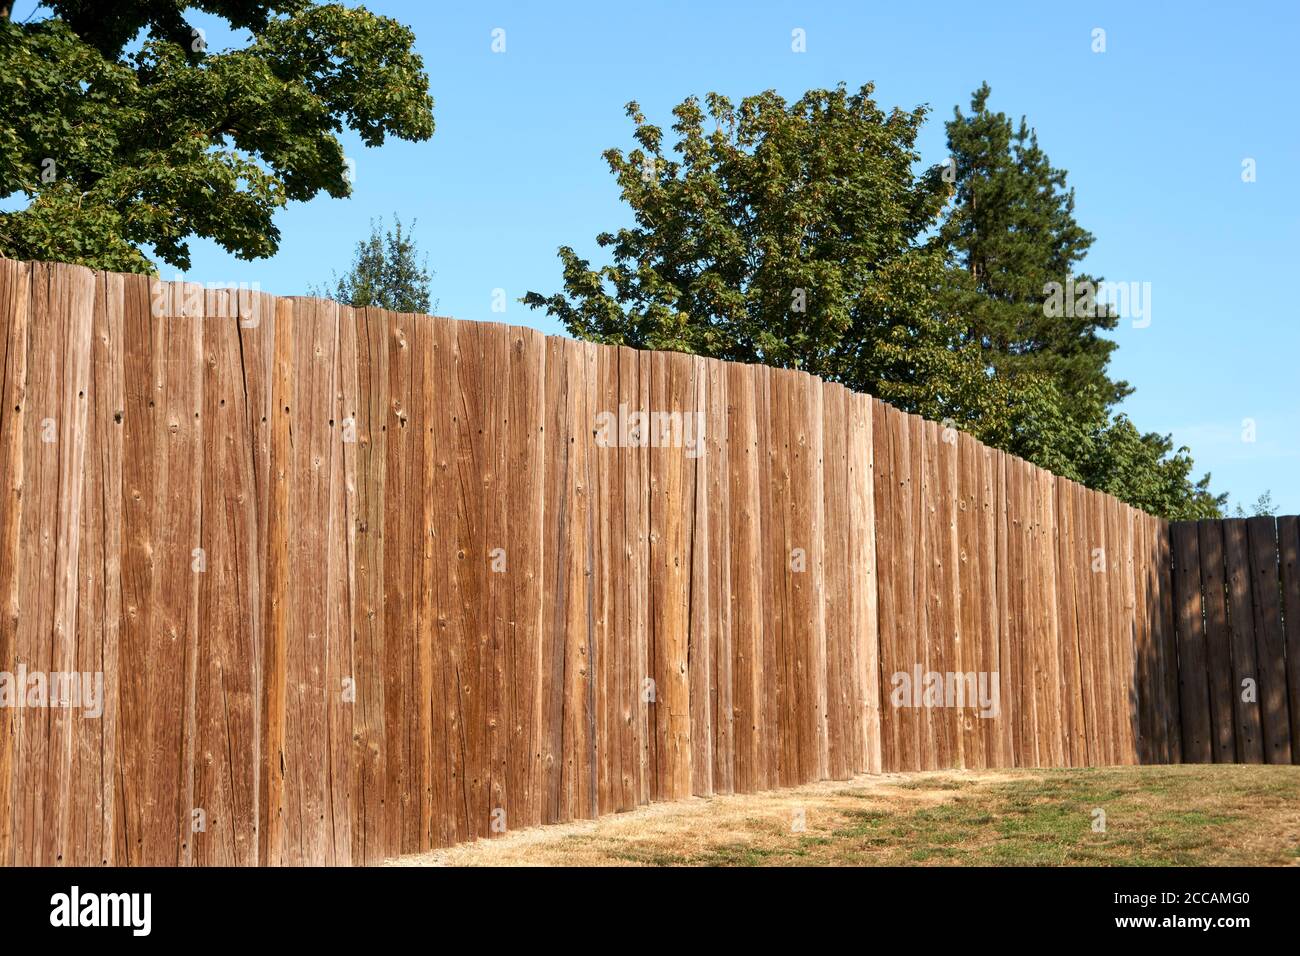 Wooden stockade fence at Fort Langley National Historic site, British Columbia, Canada Stock Photo